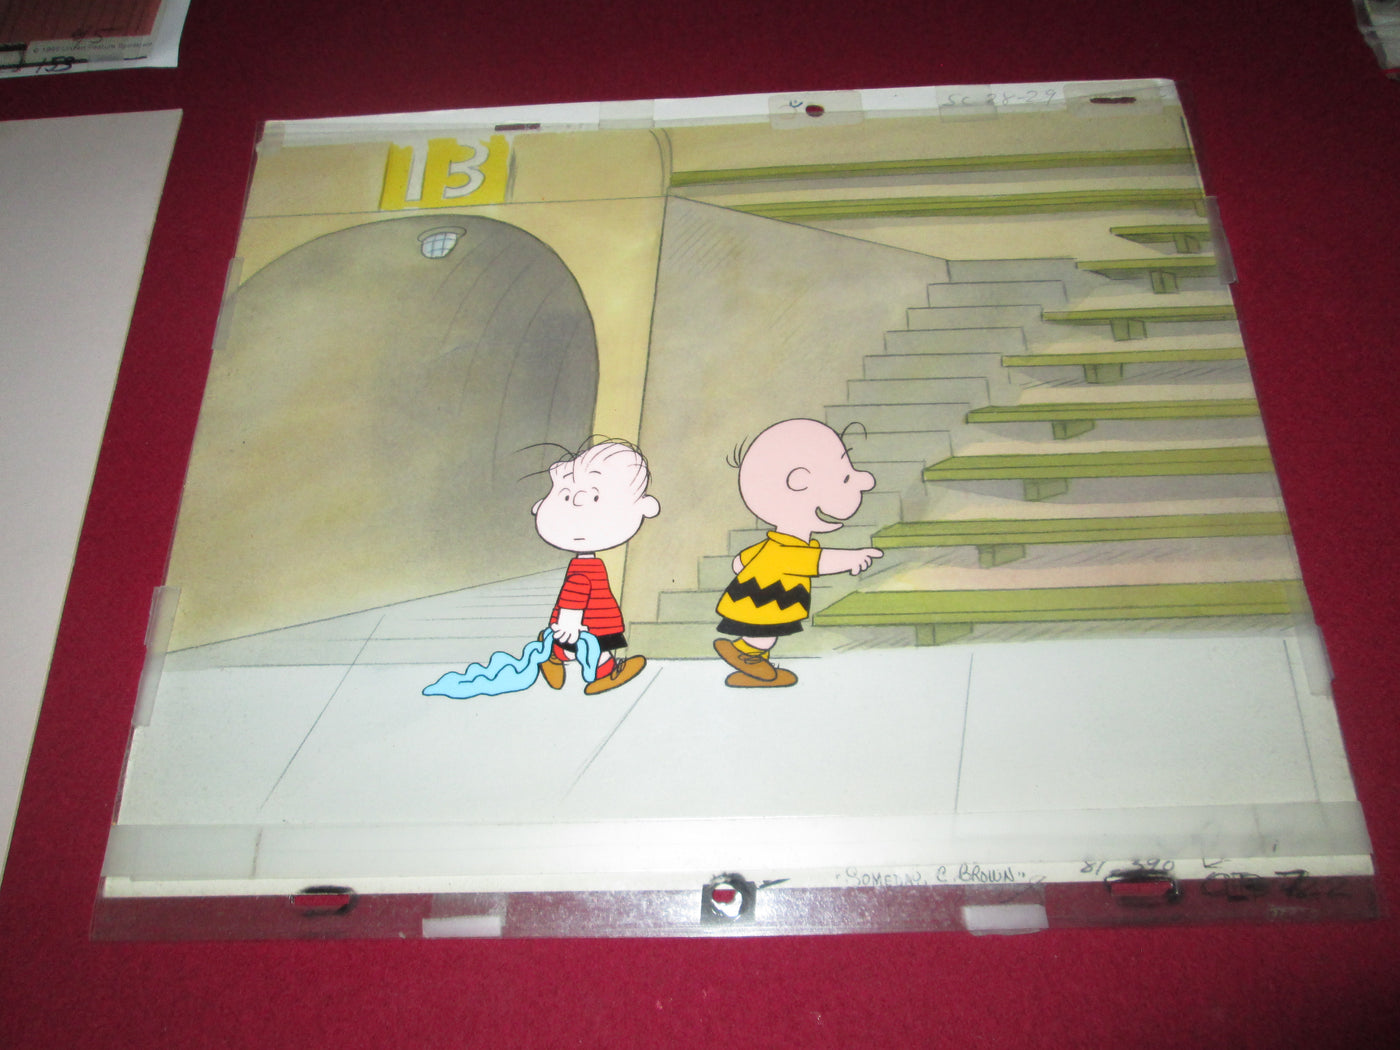 Original Peanuts Production Cel on Production Background featuring Linus and Charlie Brown from Someday You'll Find Her, Charlie Brown (1981)